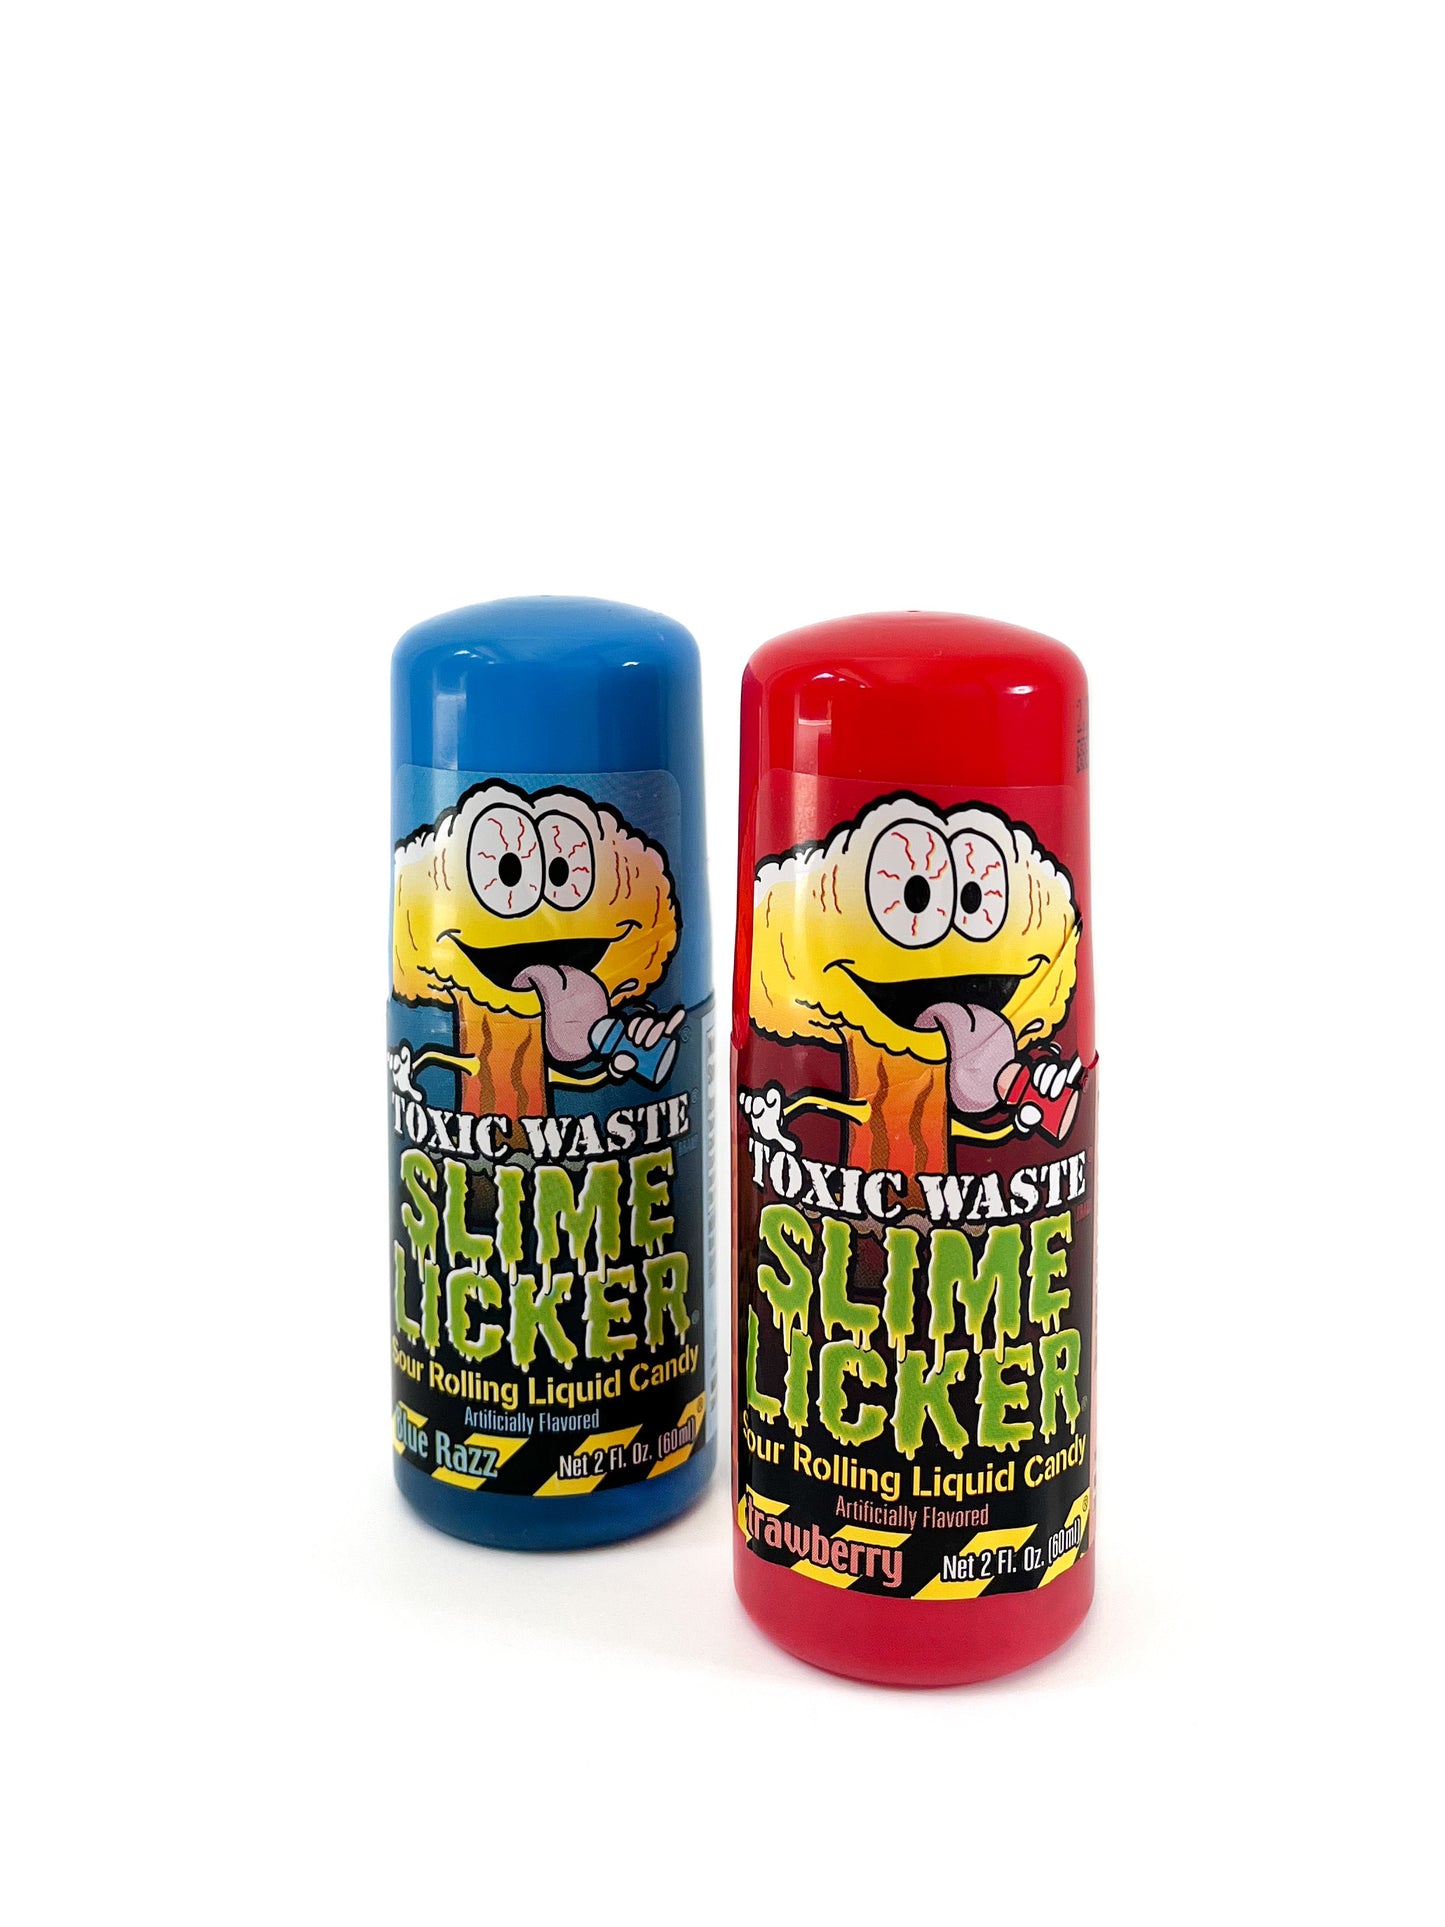 Toxic Waste Slime Licker Sour Rolling Liquid Candy (US)